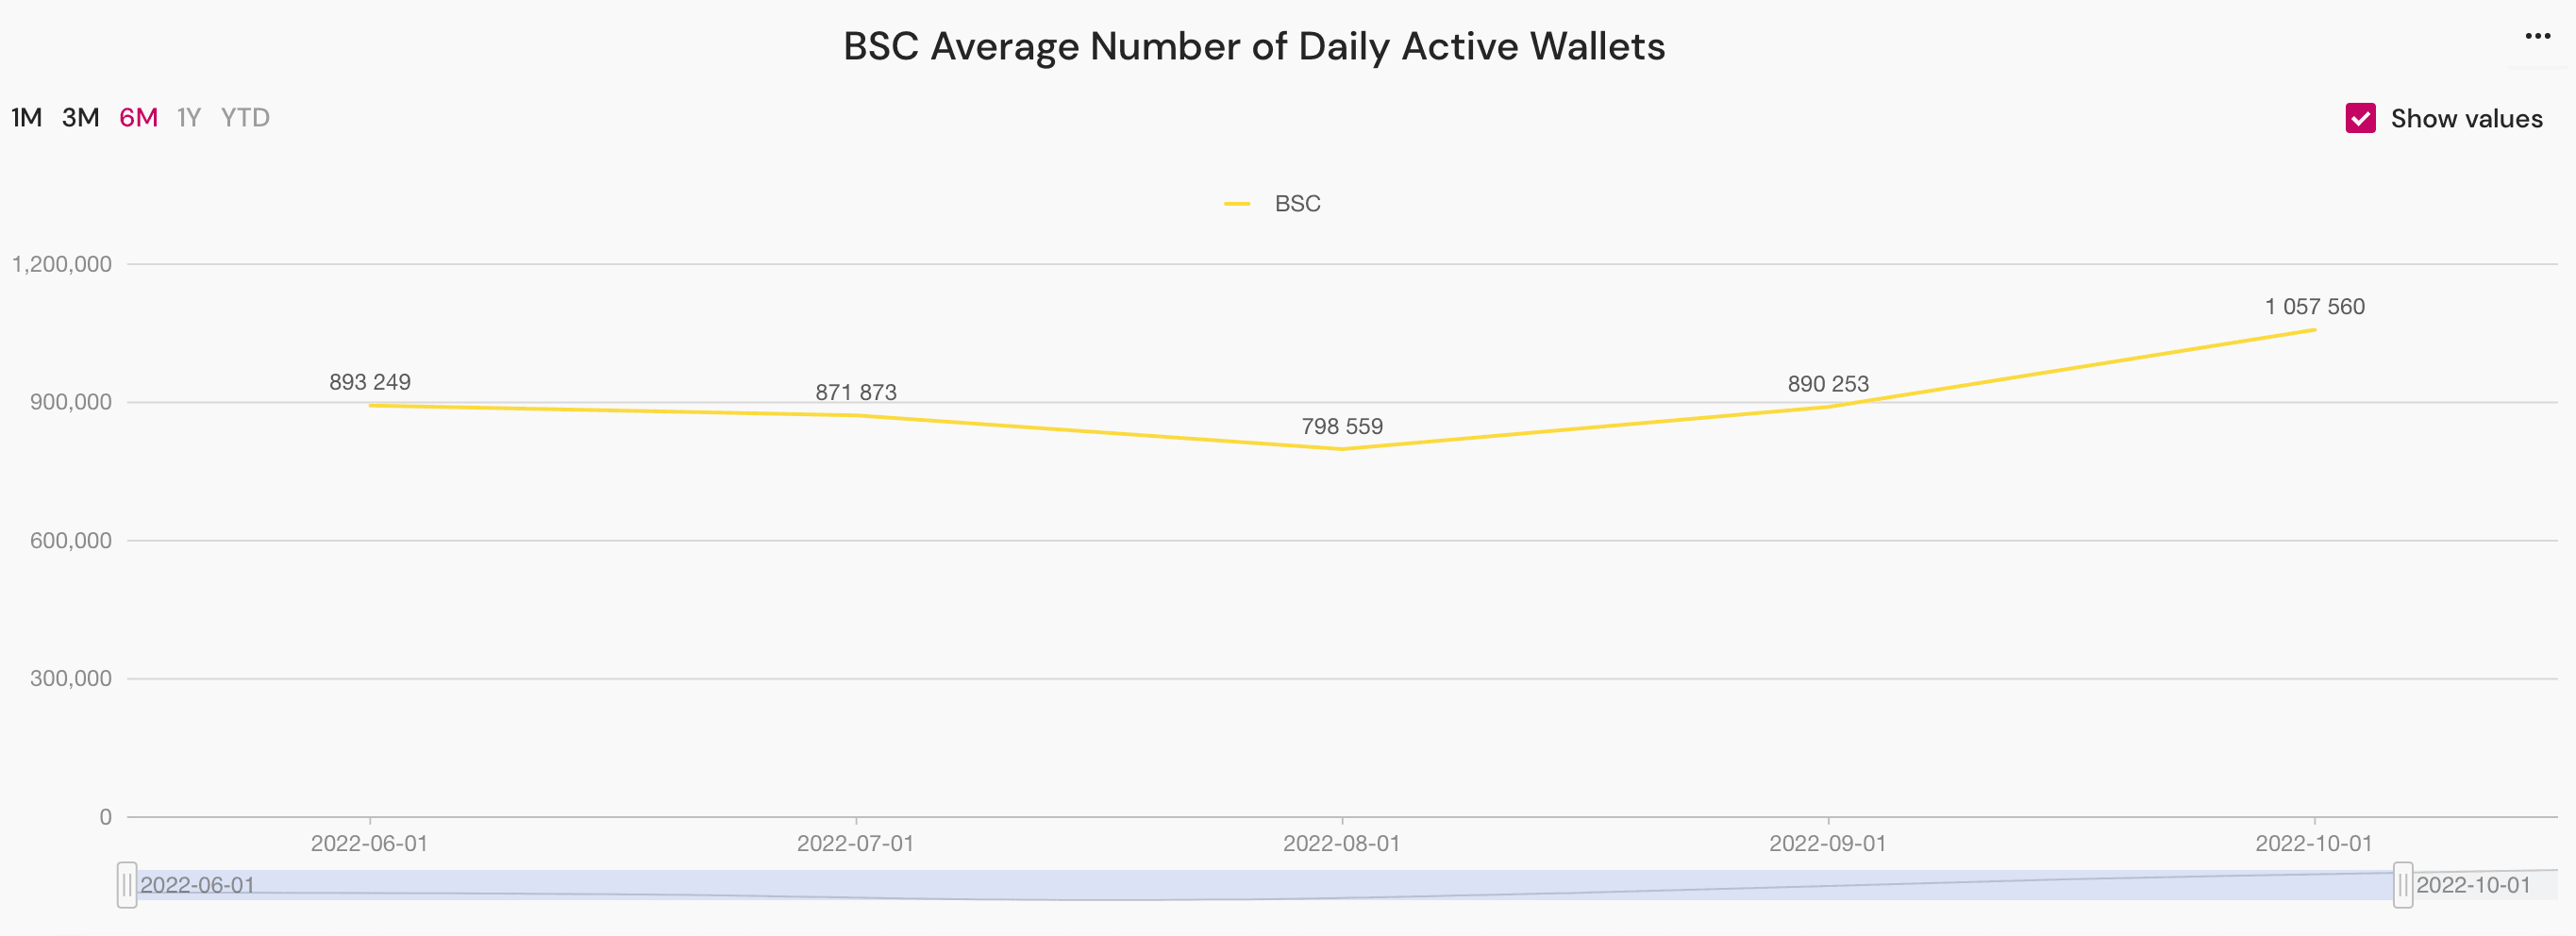 BSC Average Number of Daily Active Wallets